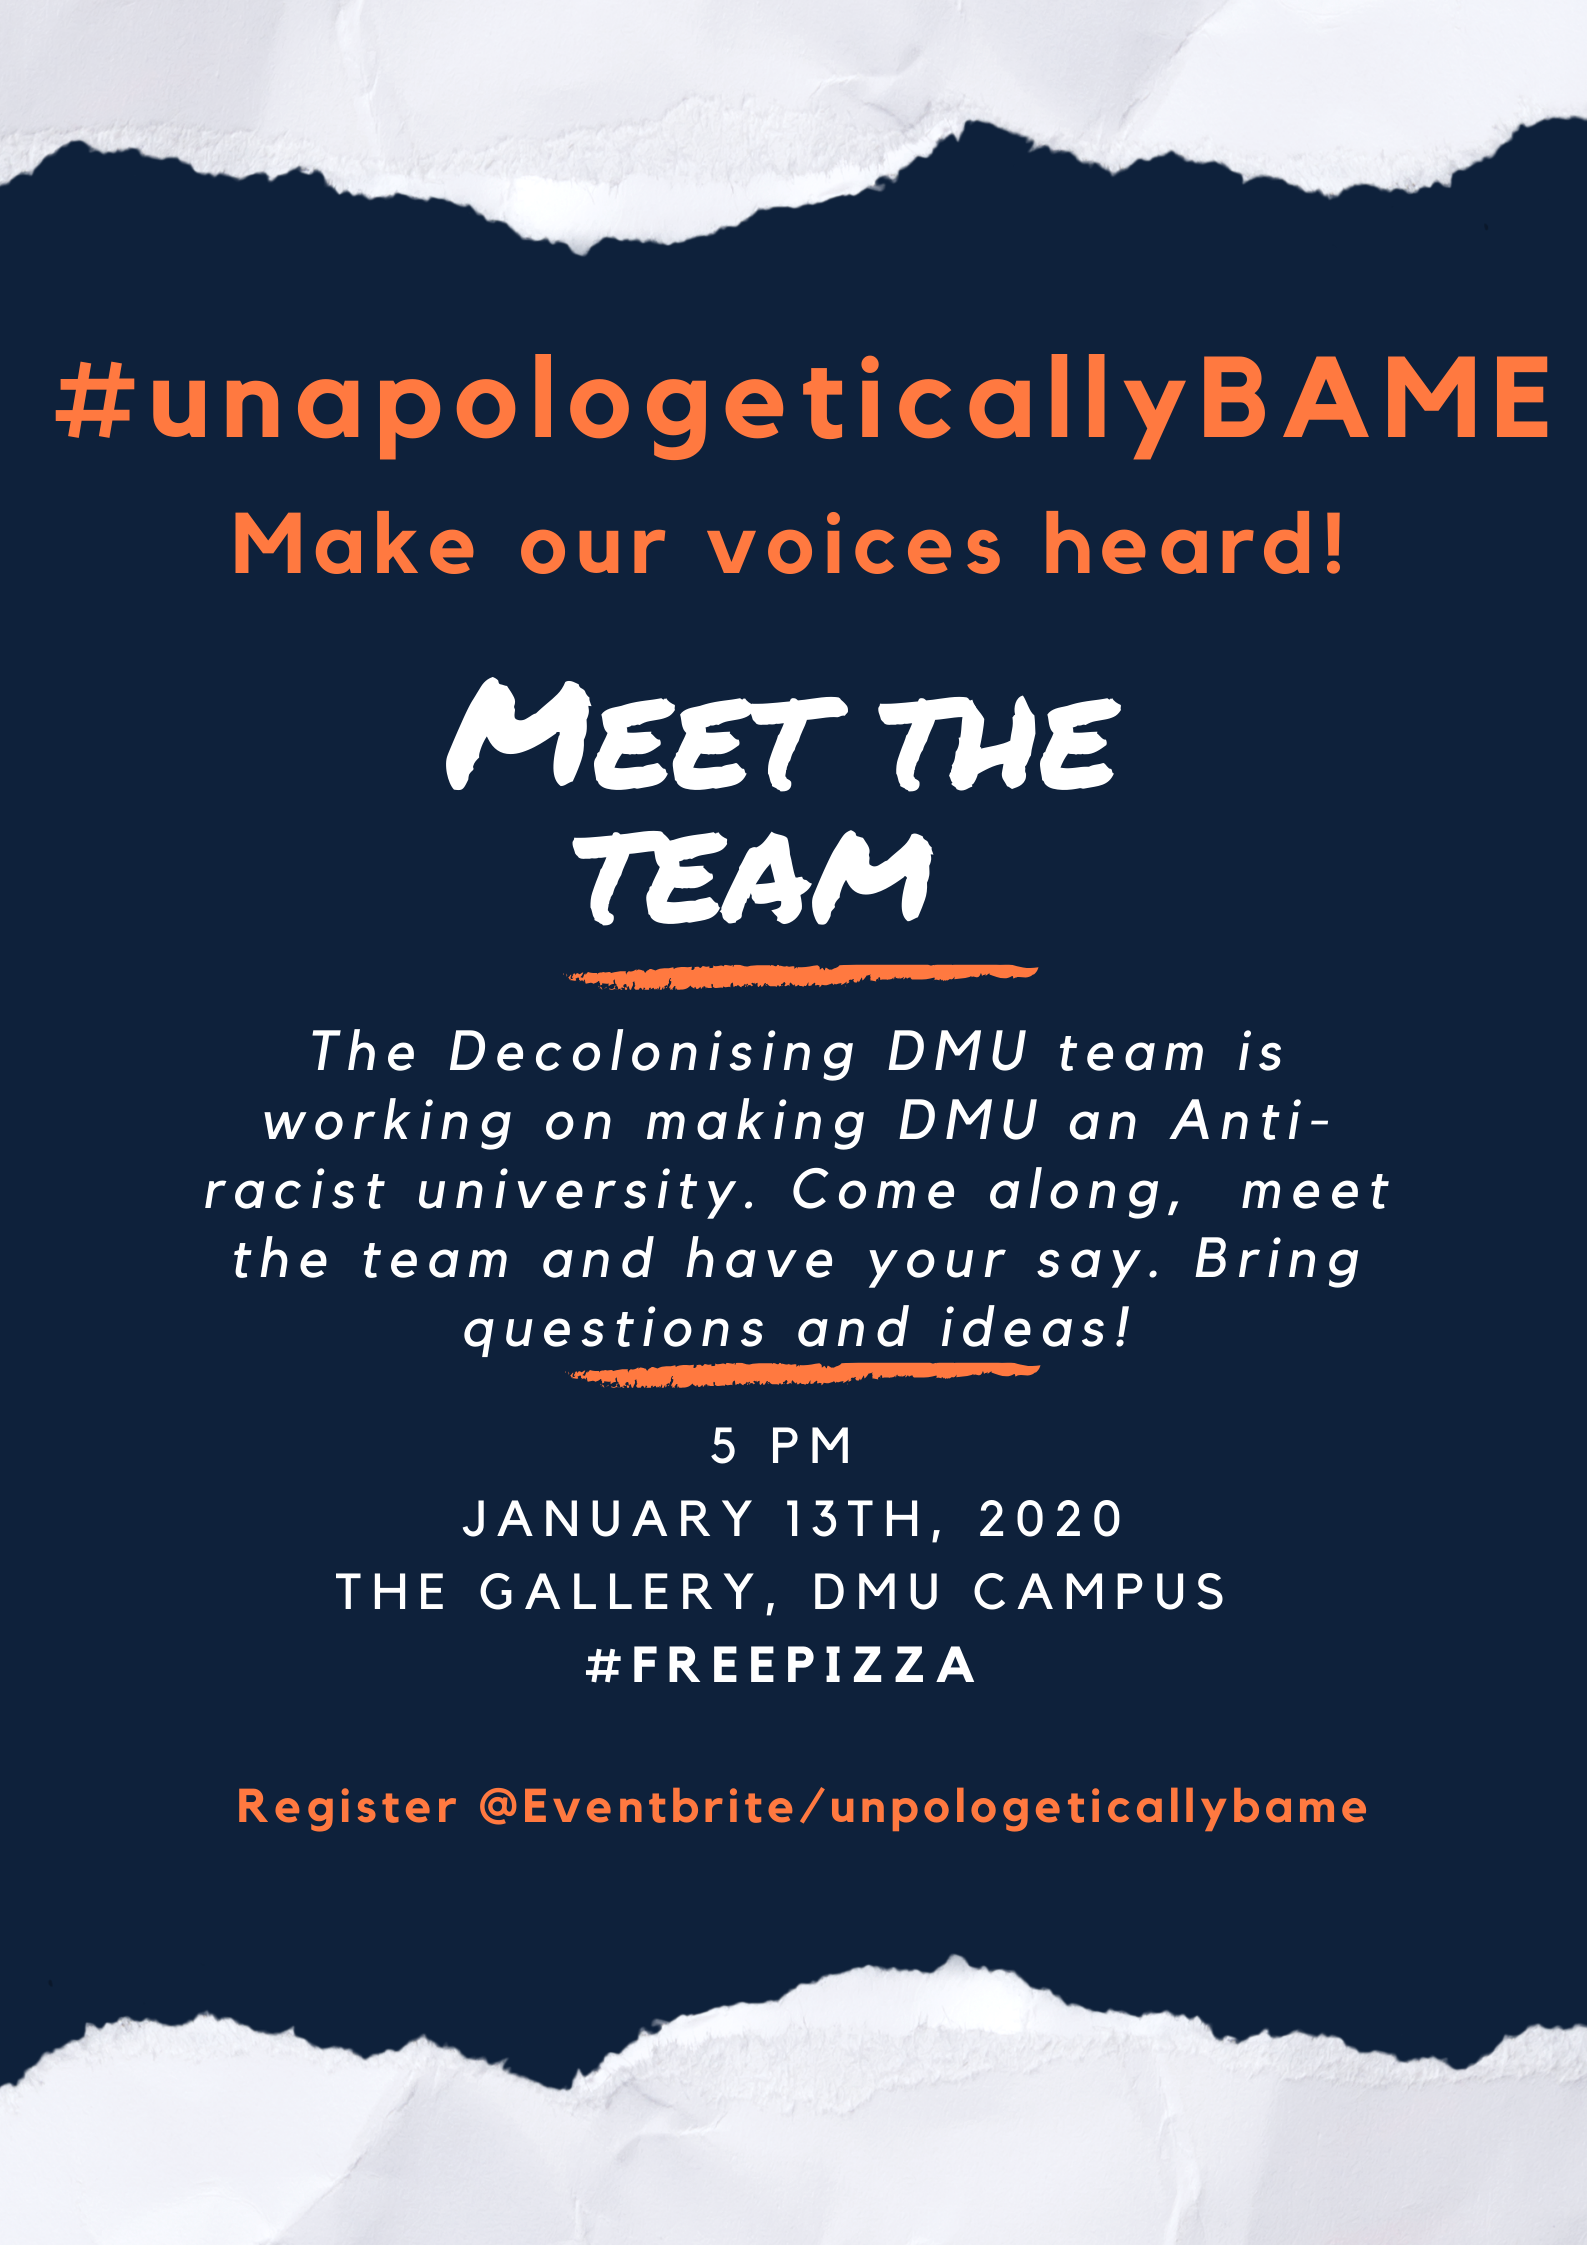 Unapologetically BAME Event poster